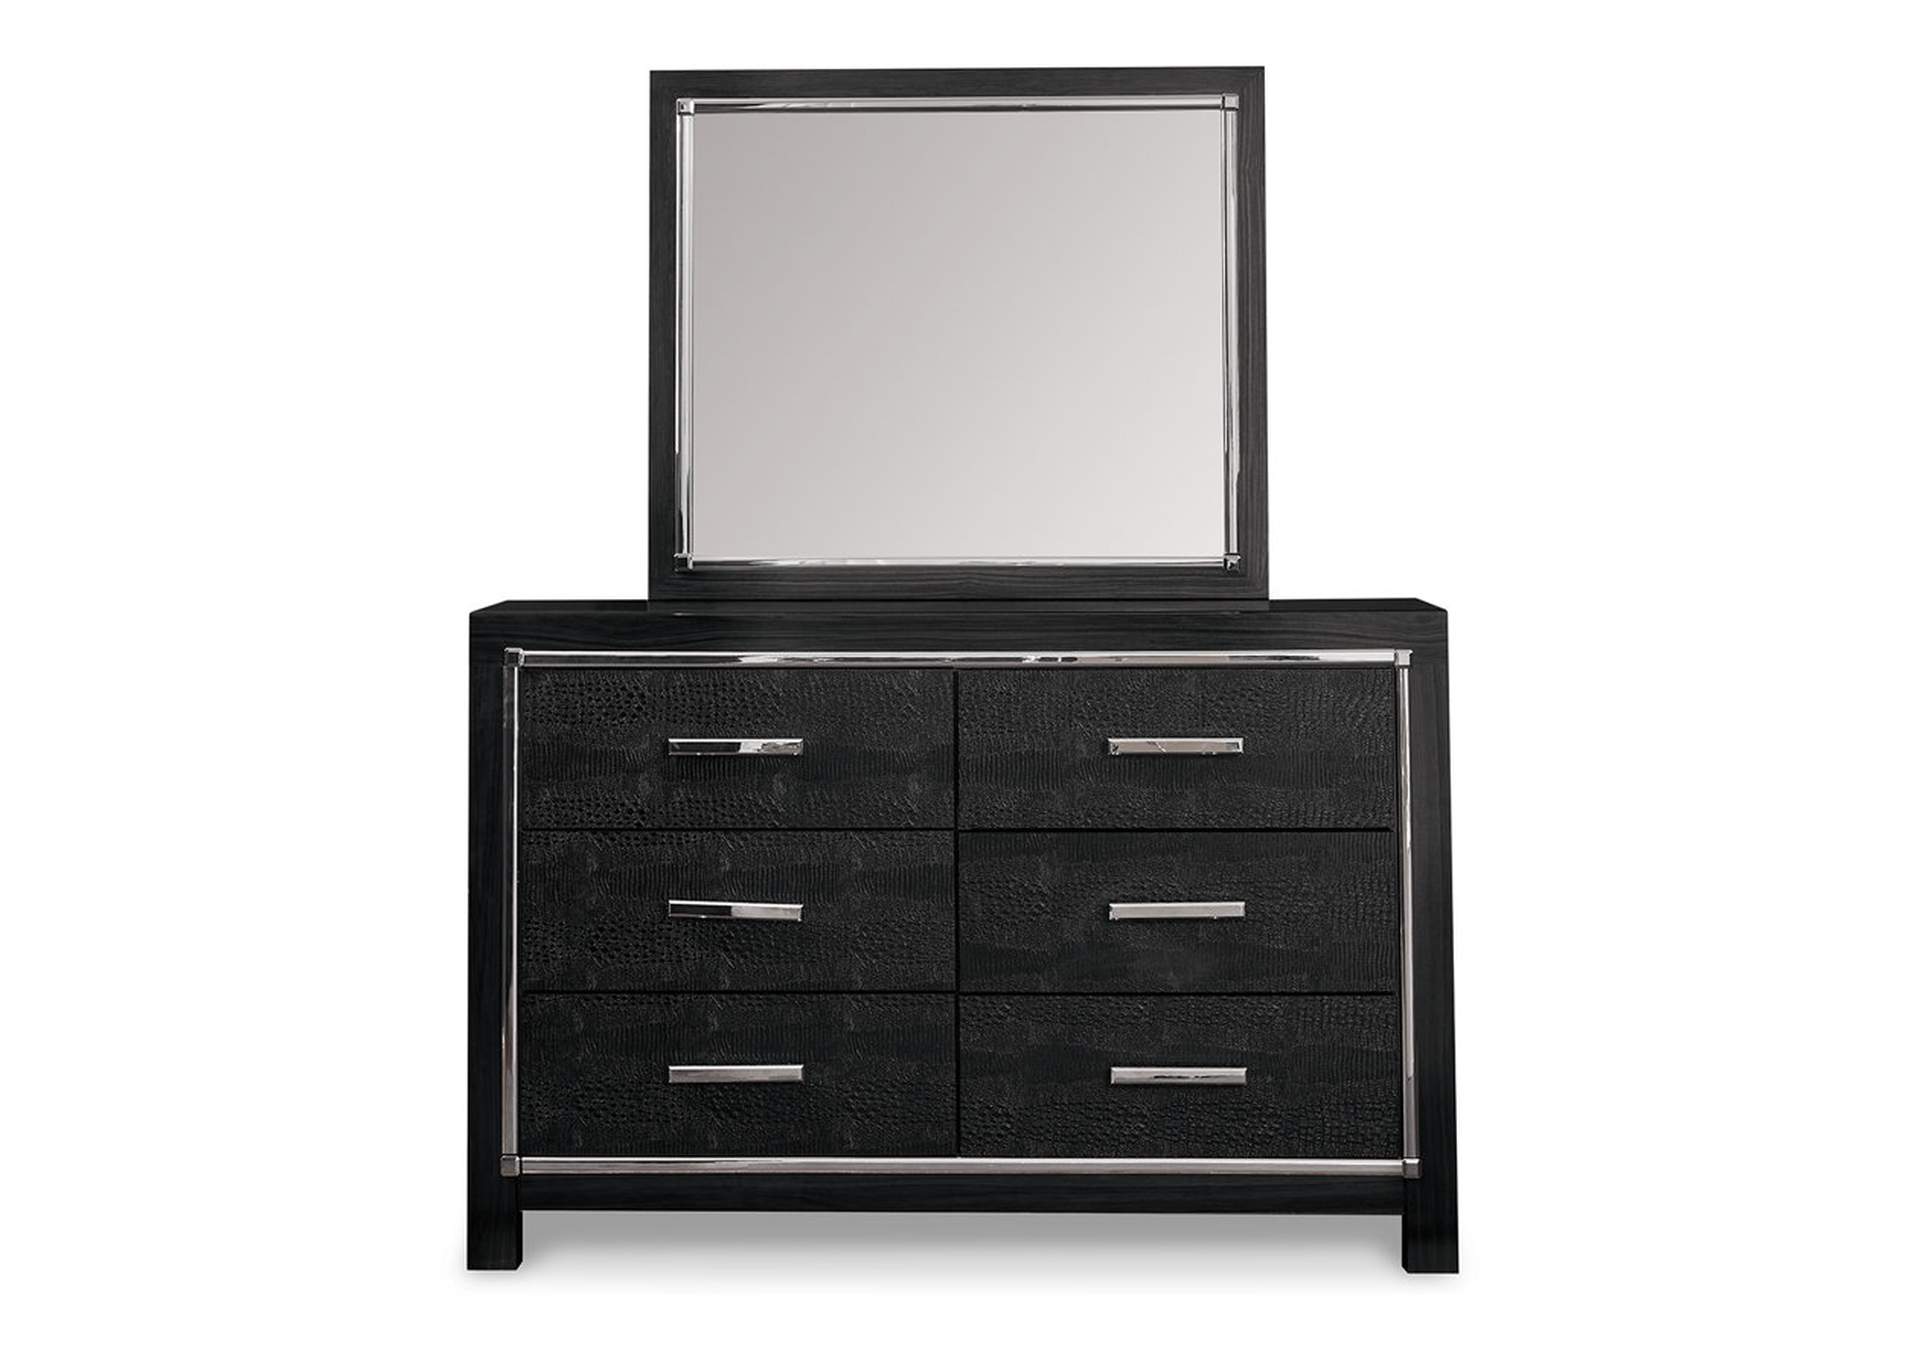 Kaydell King Upholstered Panel Storage Platform Bed with Mirrored Dresser and Chest,Signature Design By Ashley